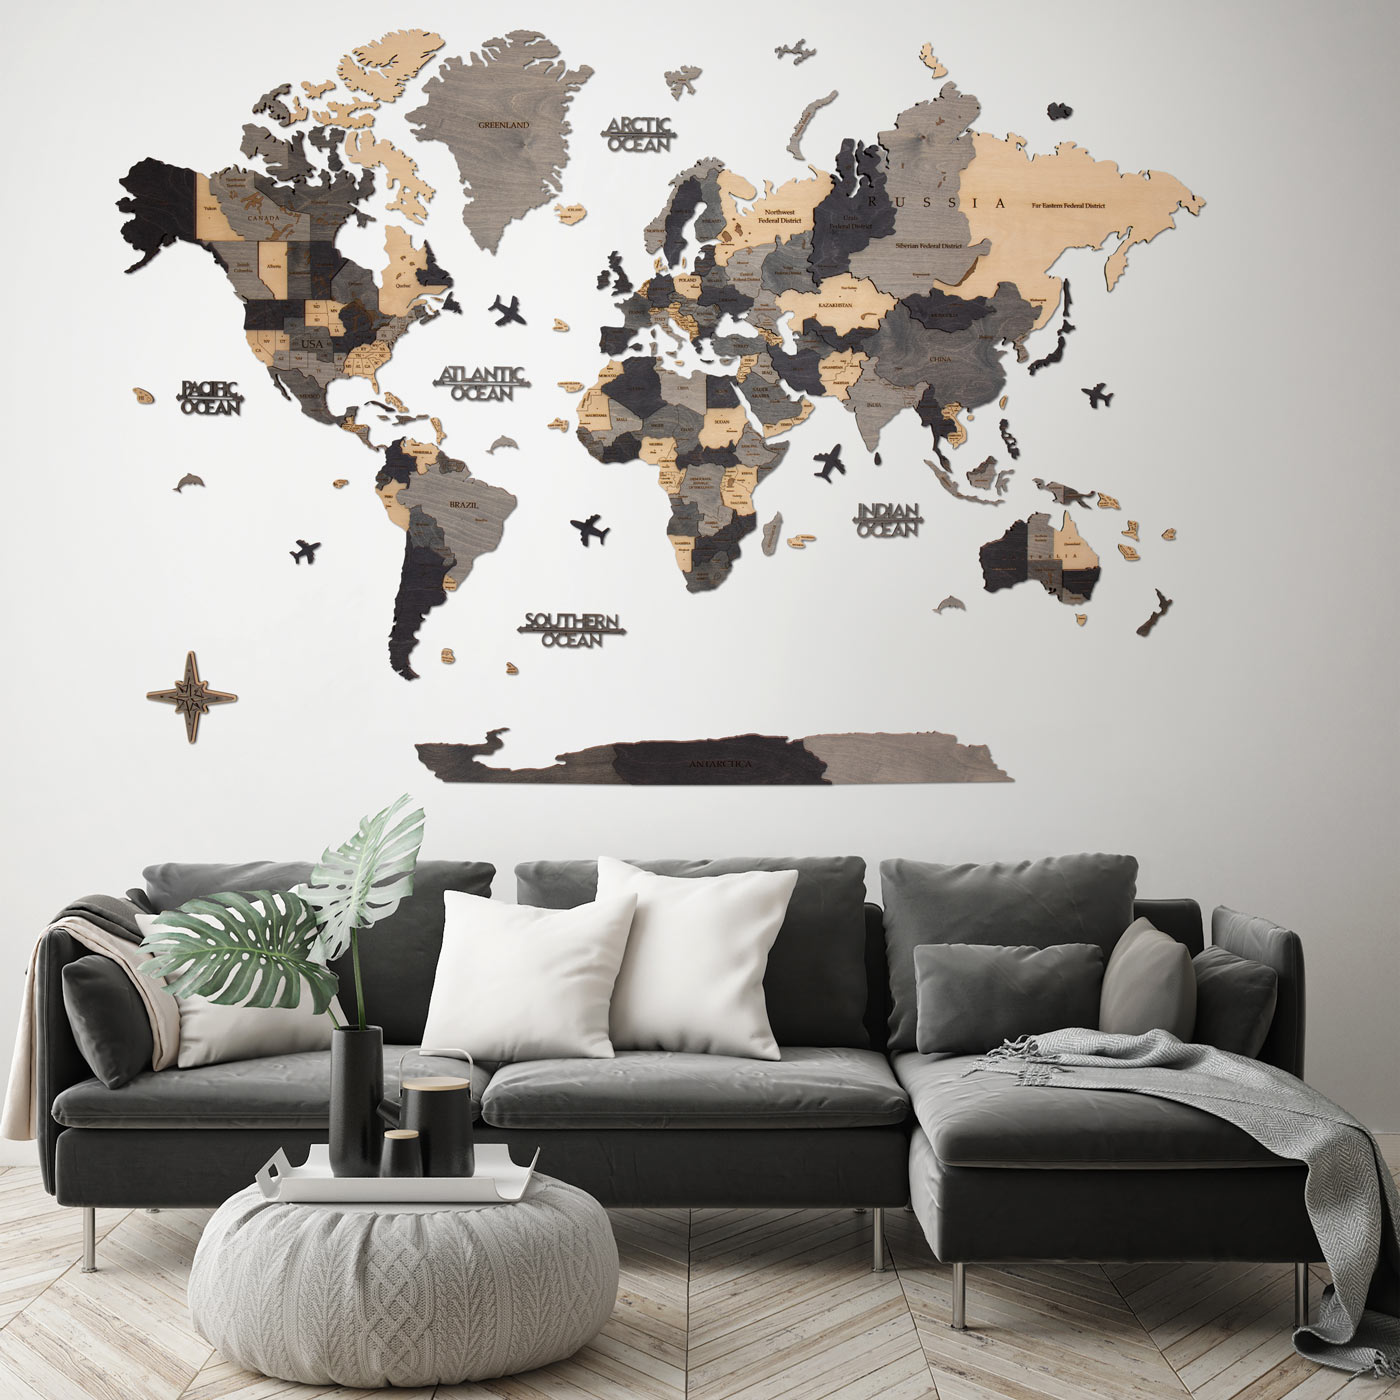 3d wooden world map. Wall wooden decor. Map with gray and beige shades. Ksilart